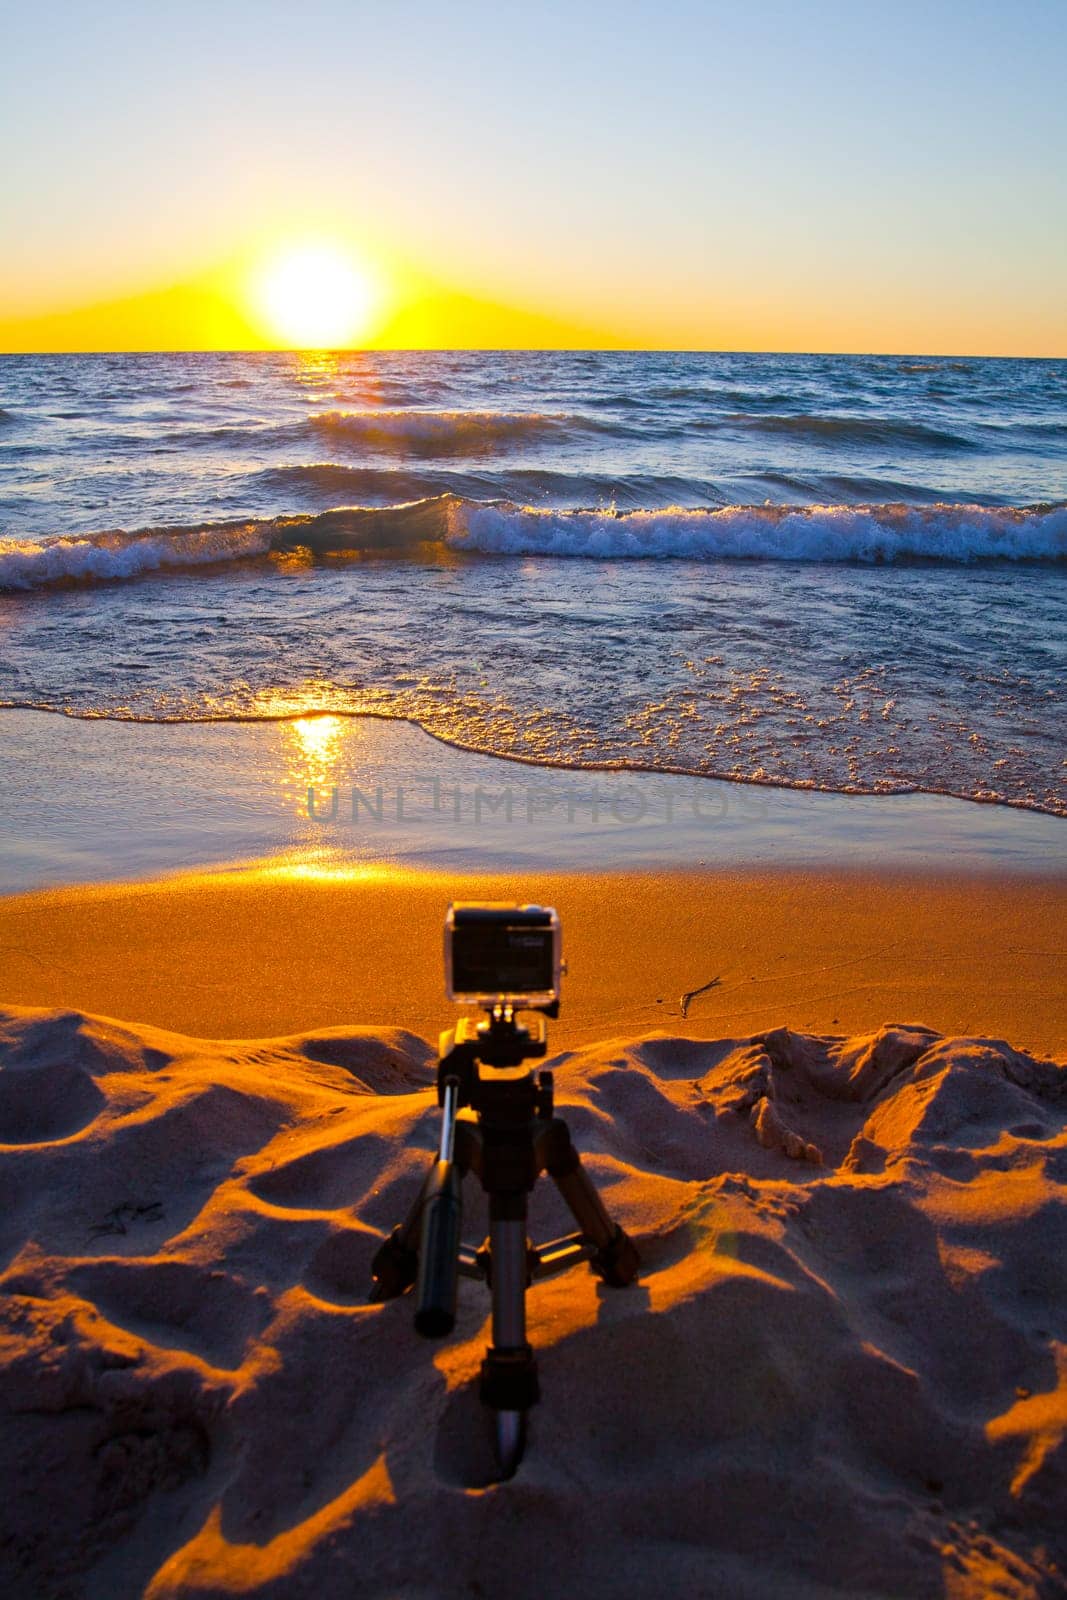 Capture the beauty of a beach sunset with this camera set against the golden hues of the horizon. Perfect for photography, travel, and technology themes.